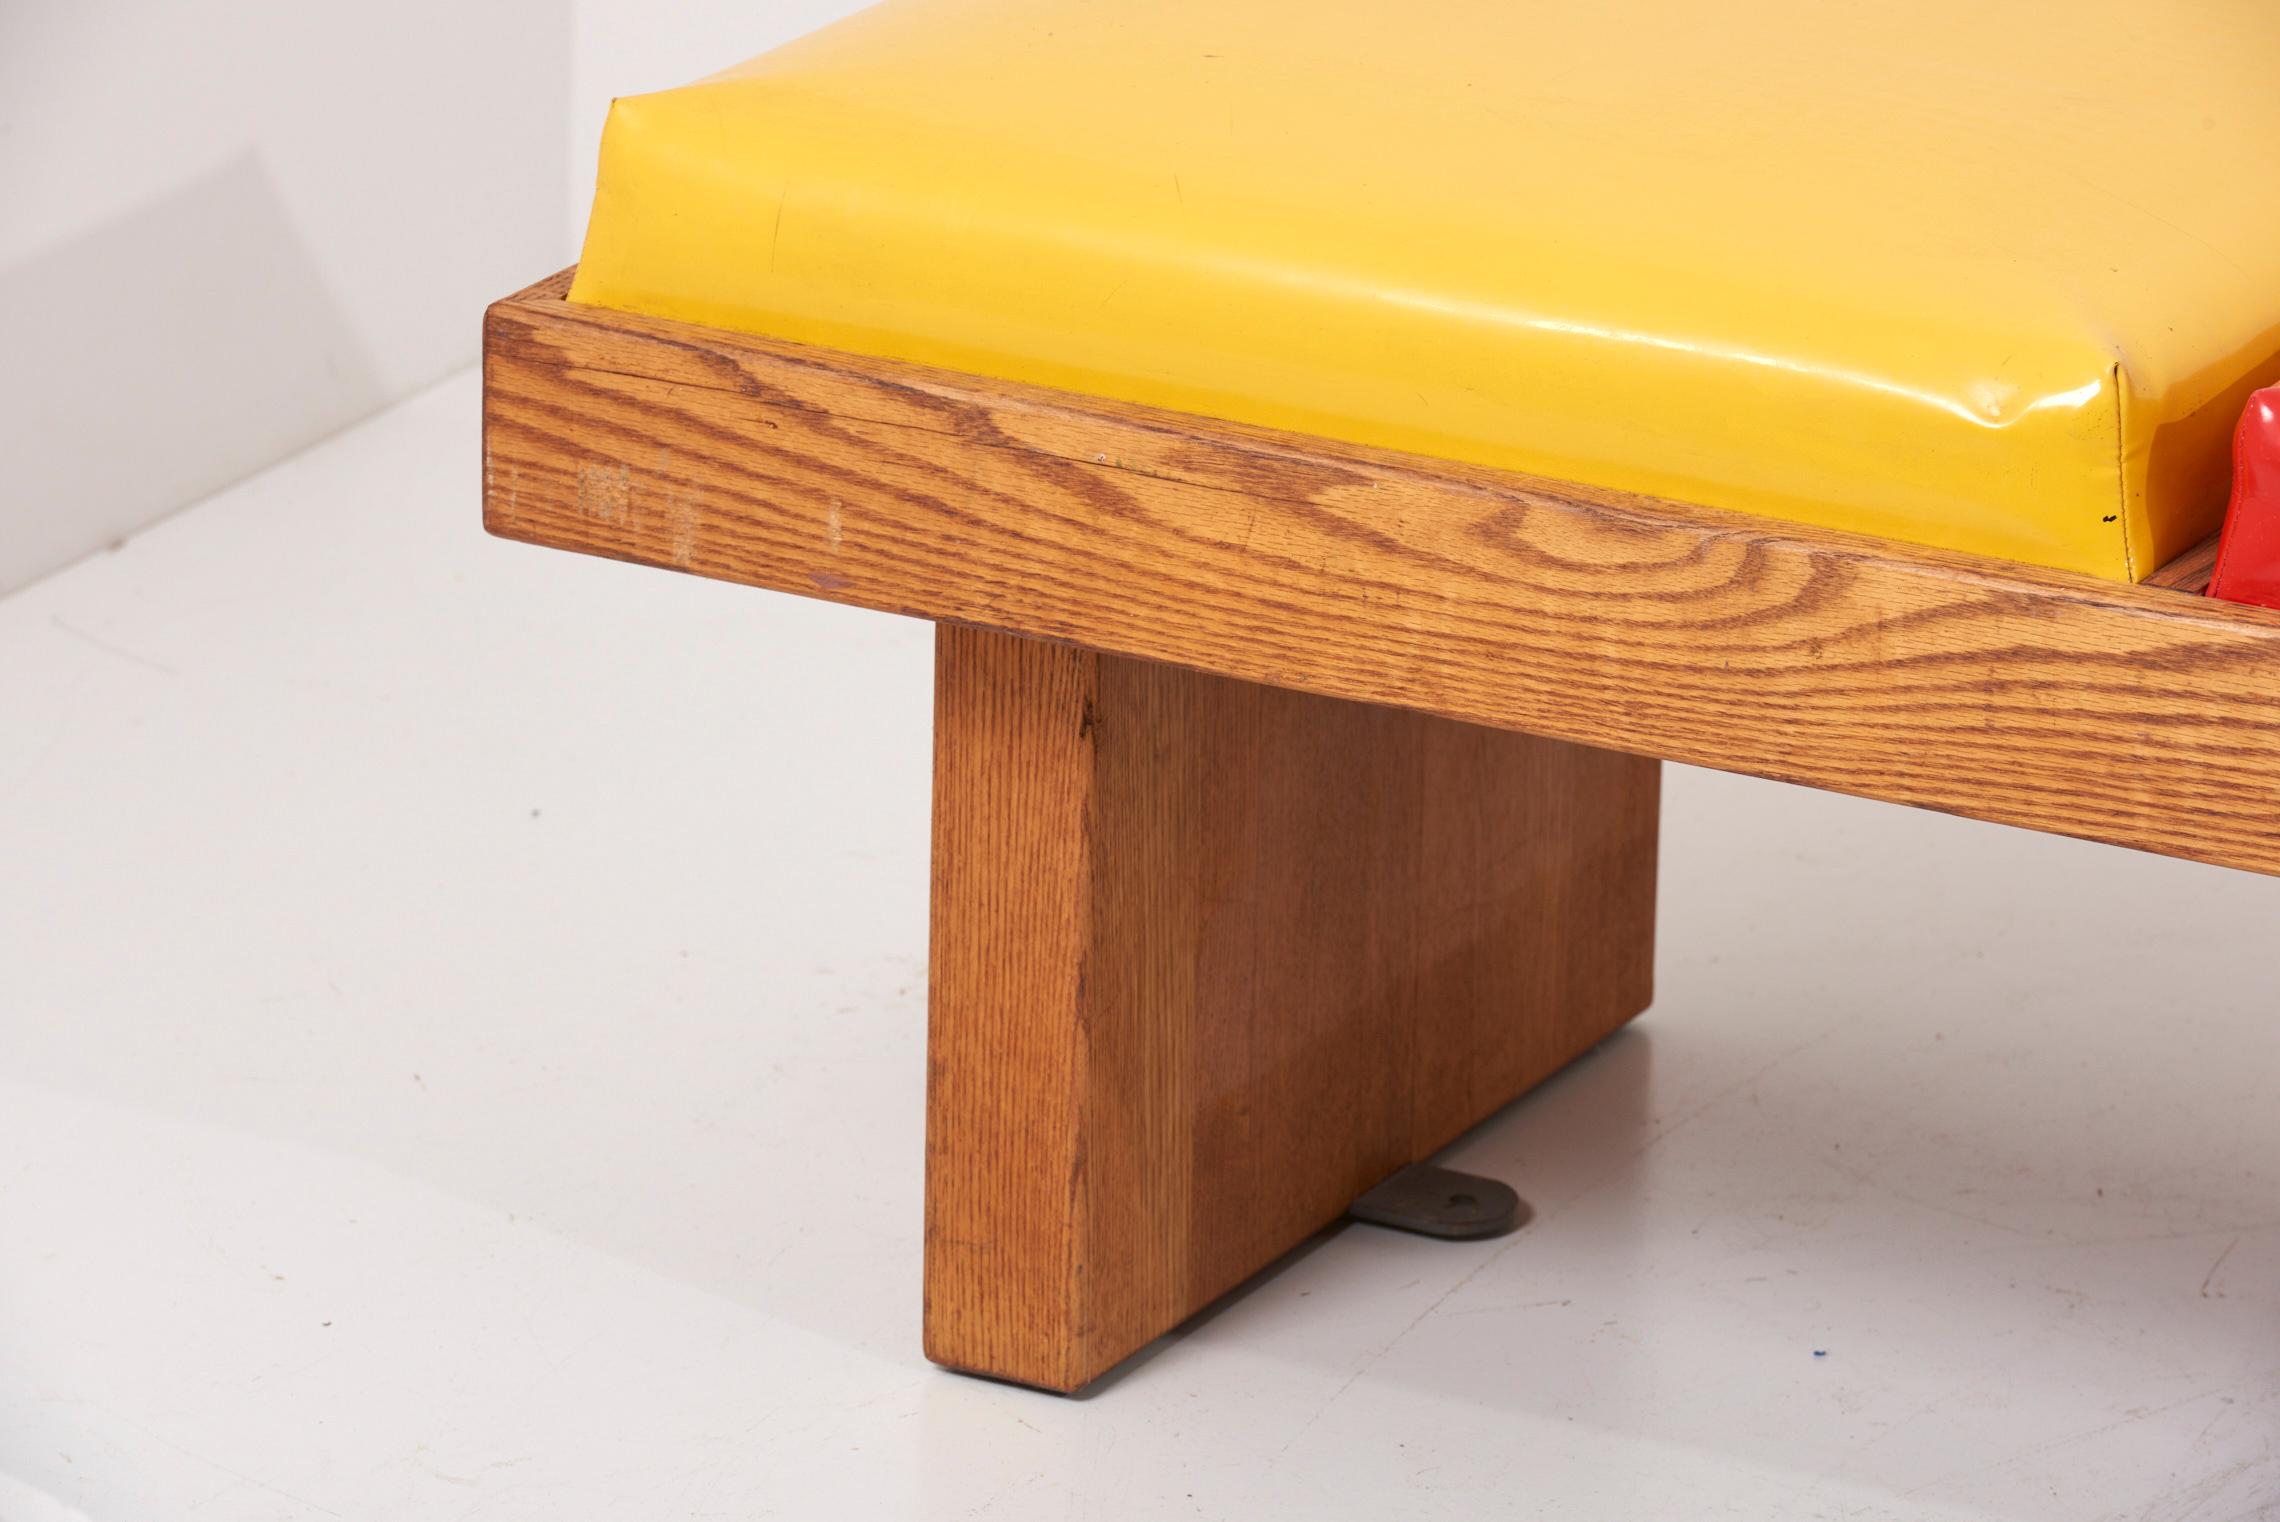 Bench by Harvey Probber in Ketchup / Mustard in Oak, USA 1960s For Sale 4